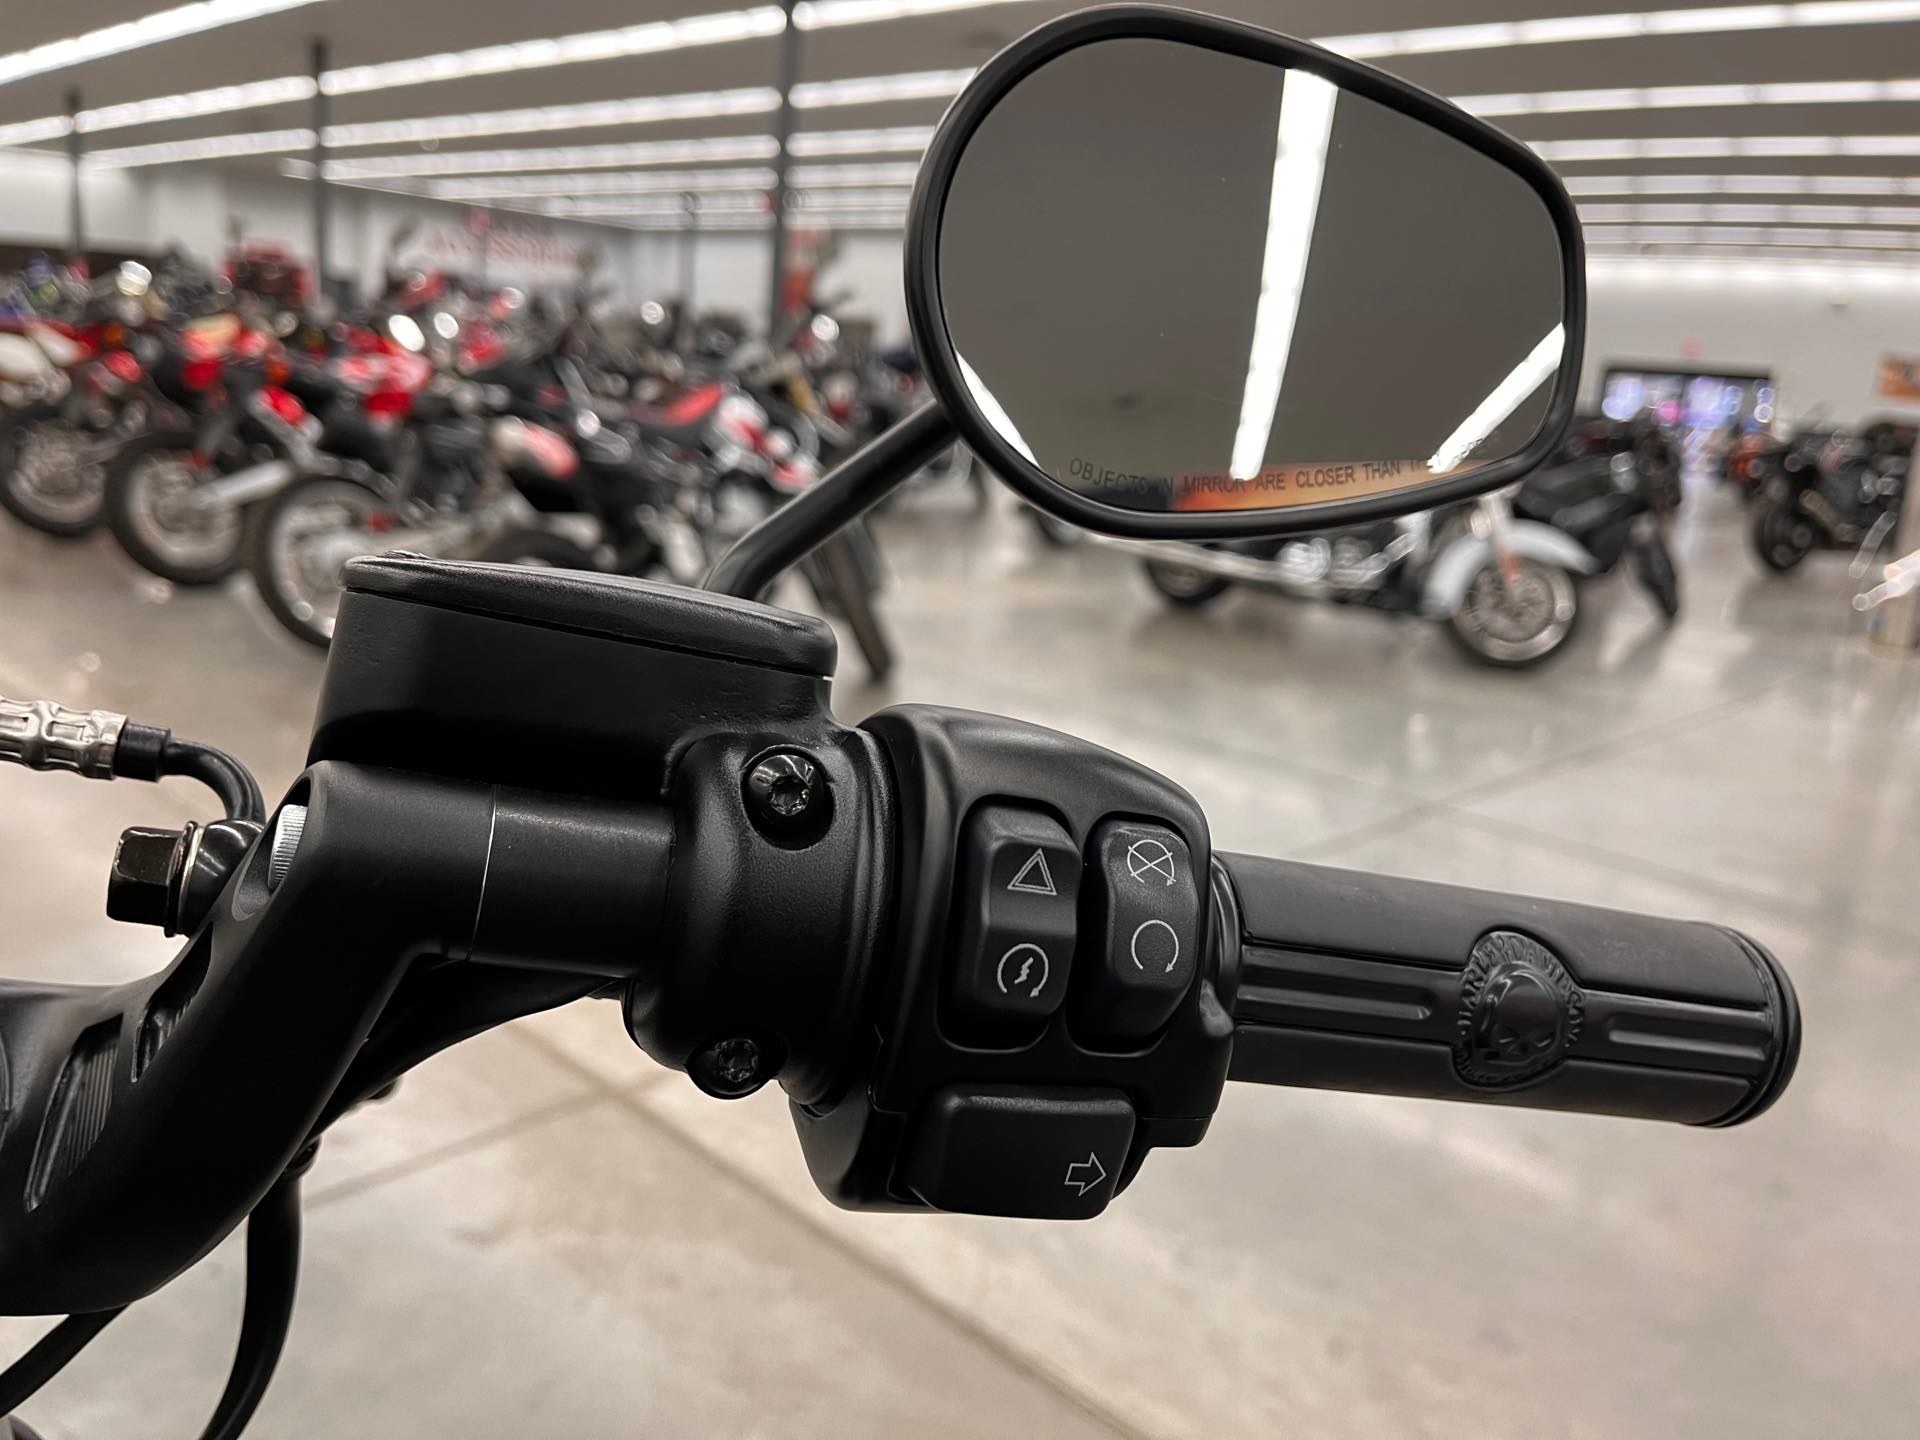 2019 Harley-Davidson Softail FXDR 114 at Aces Motorcycles - Denver